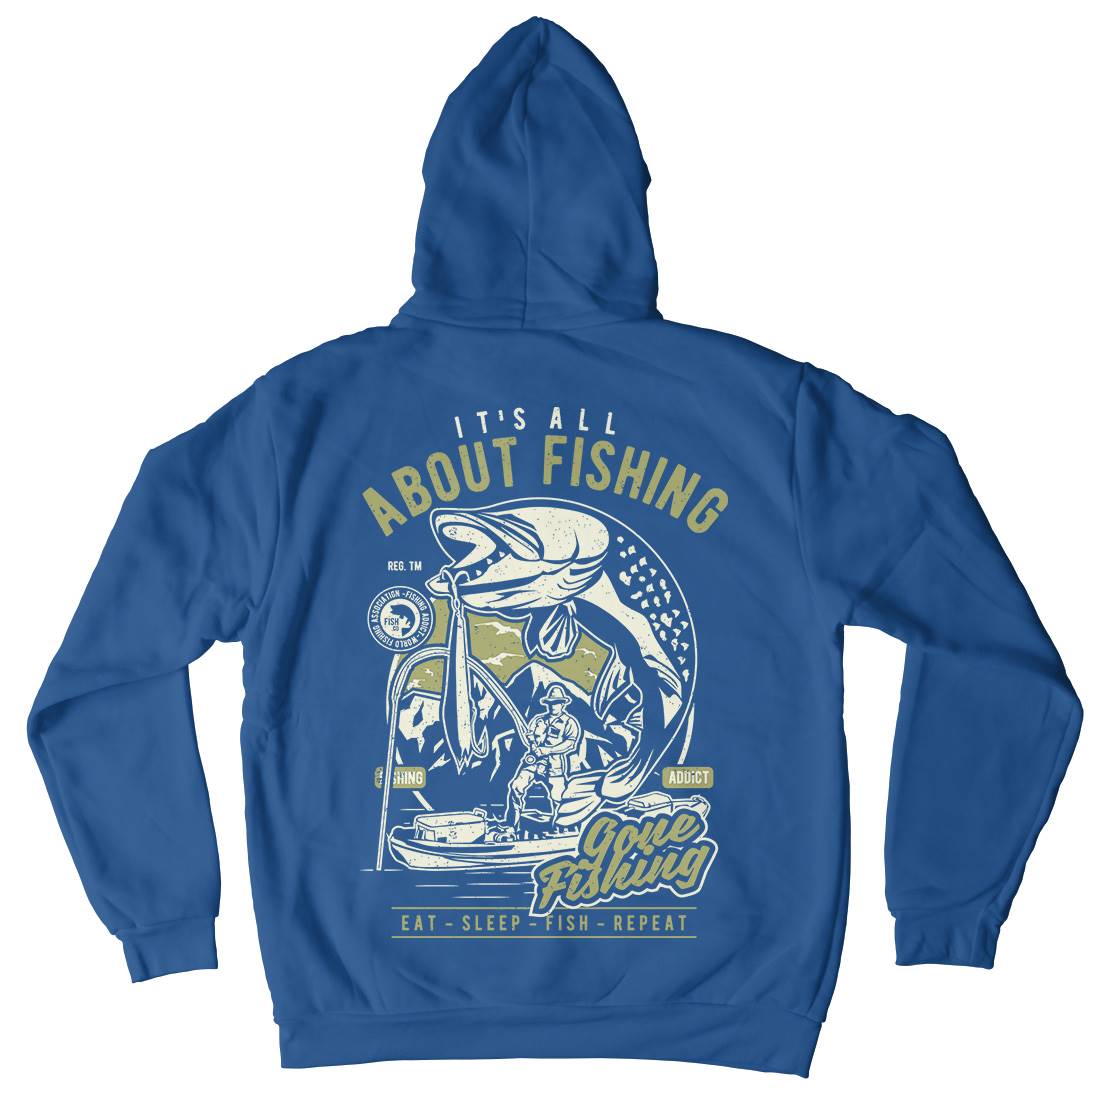 All About Mens Hoodie With Pocket Fishing A604